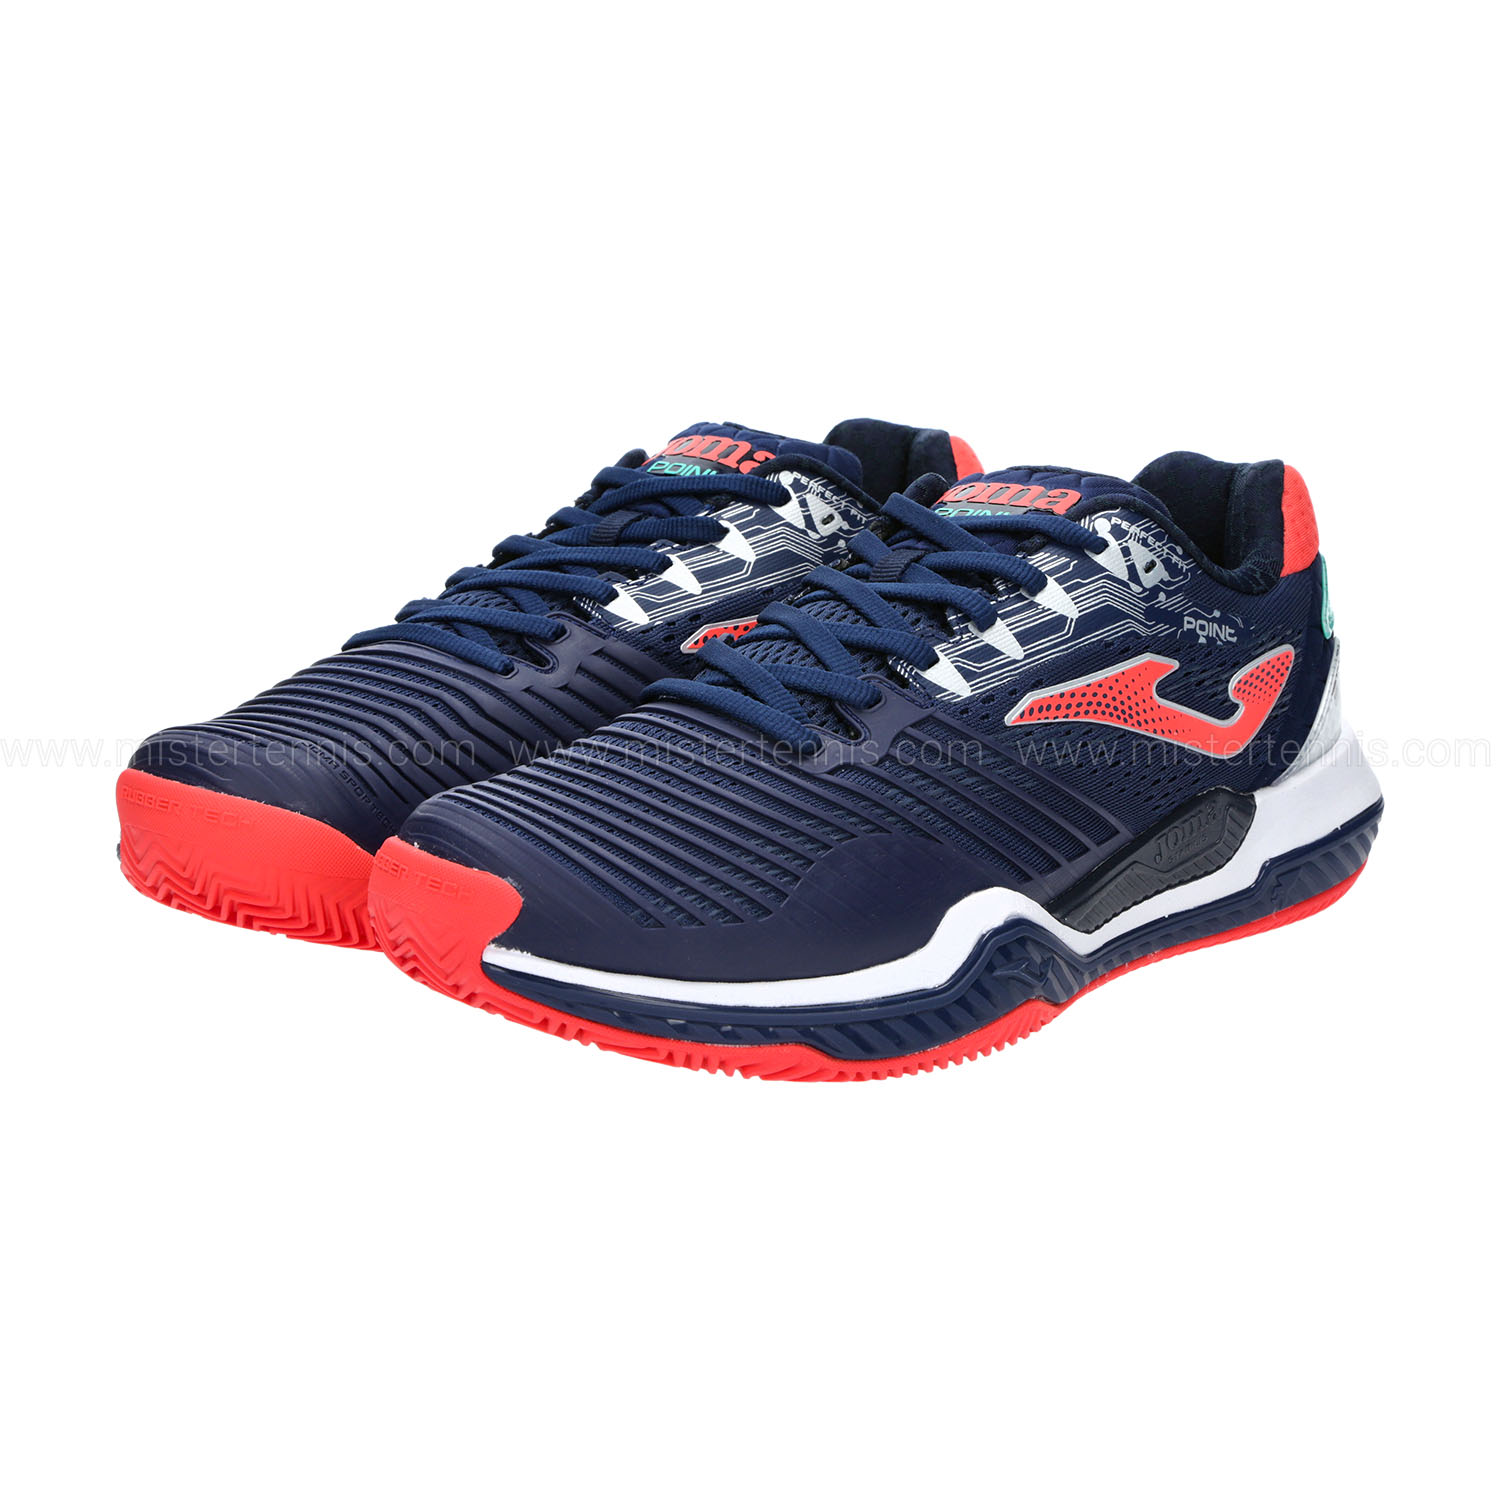 Joma Point Clay Men's Tennis Shoes - Navy/Red